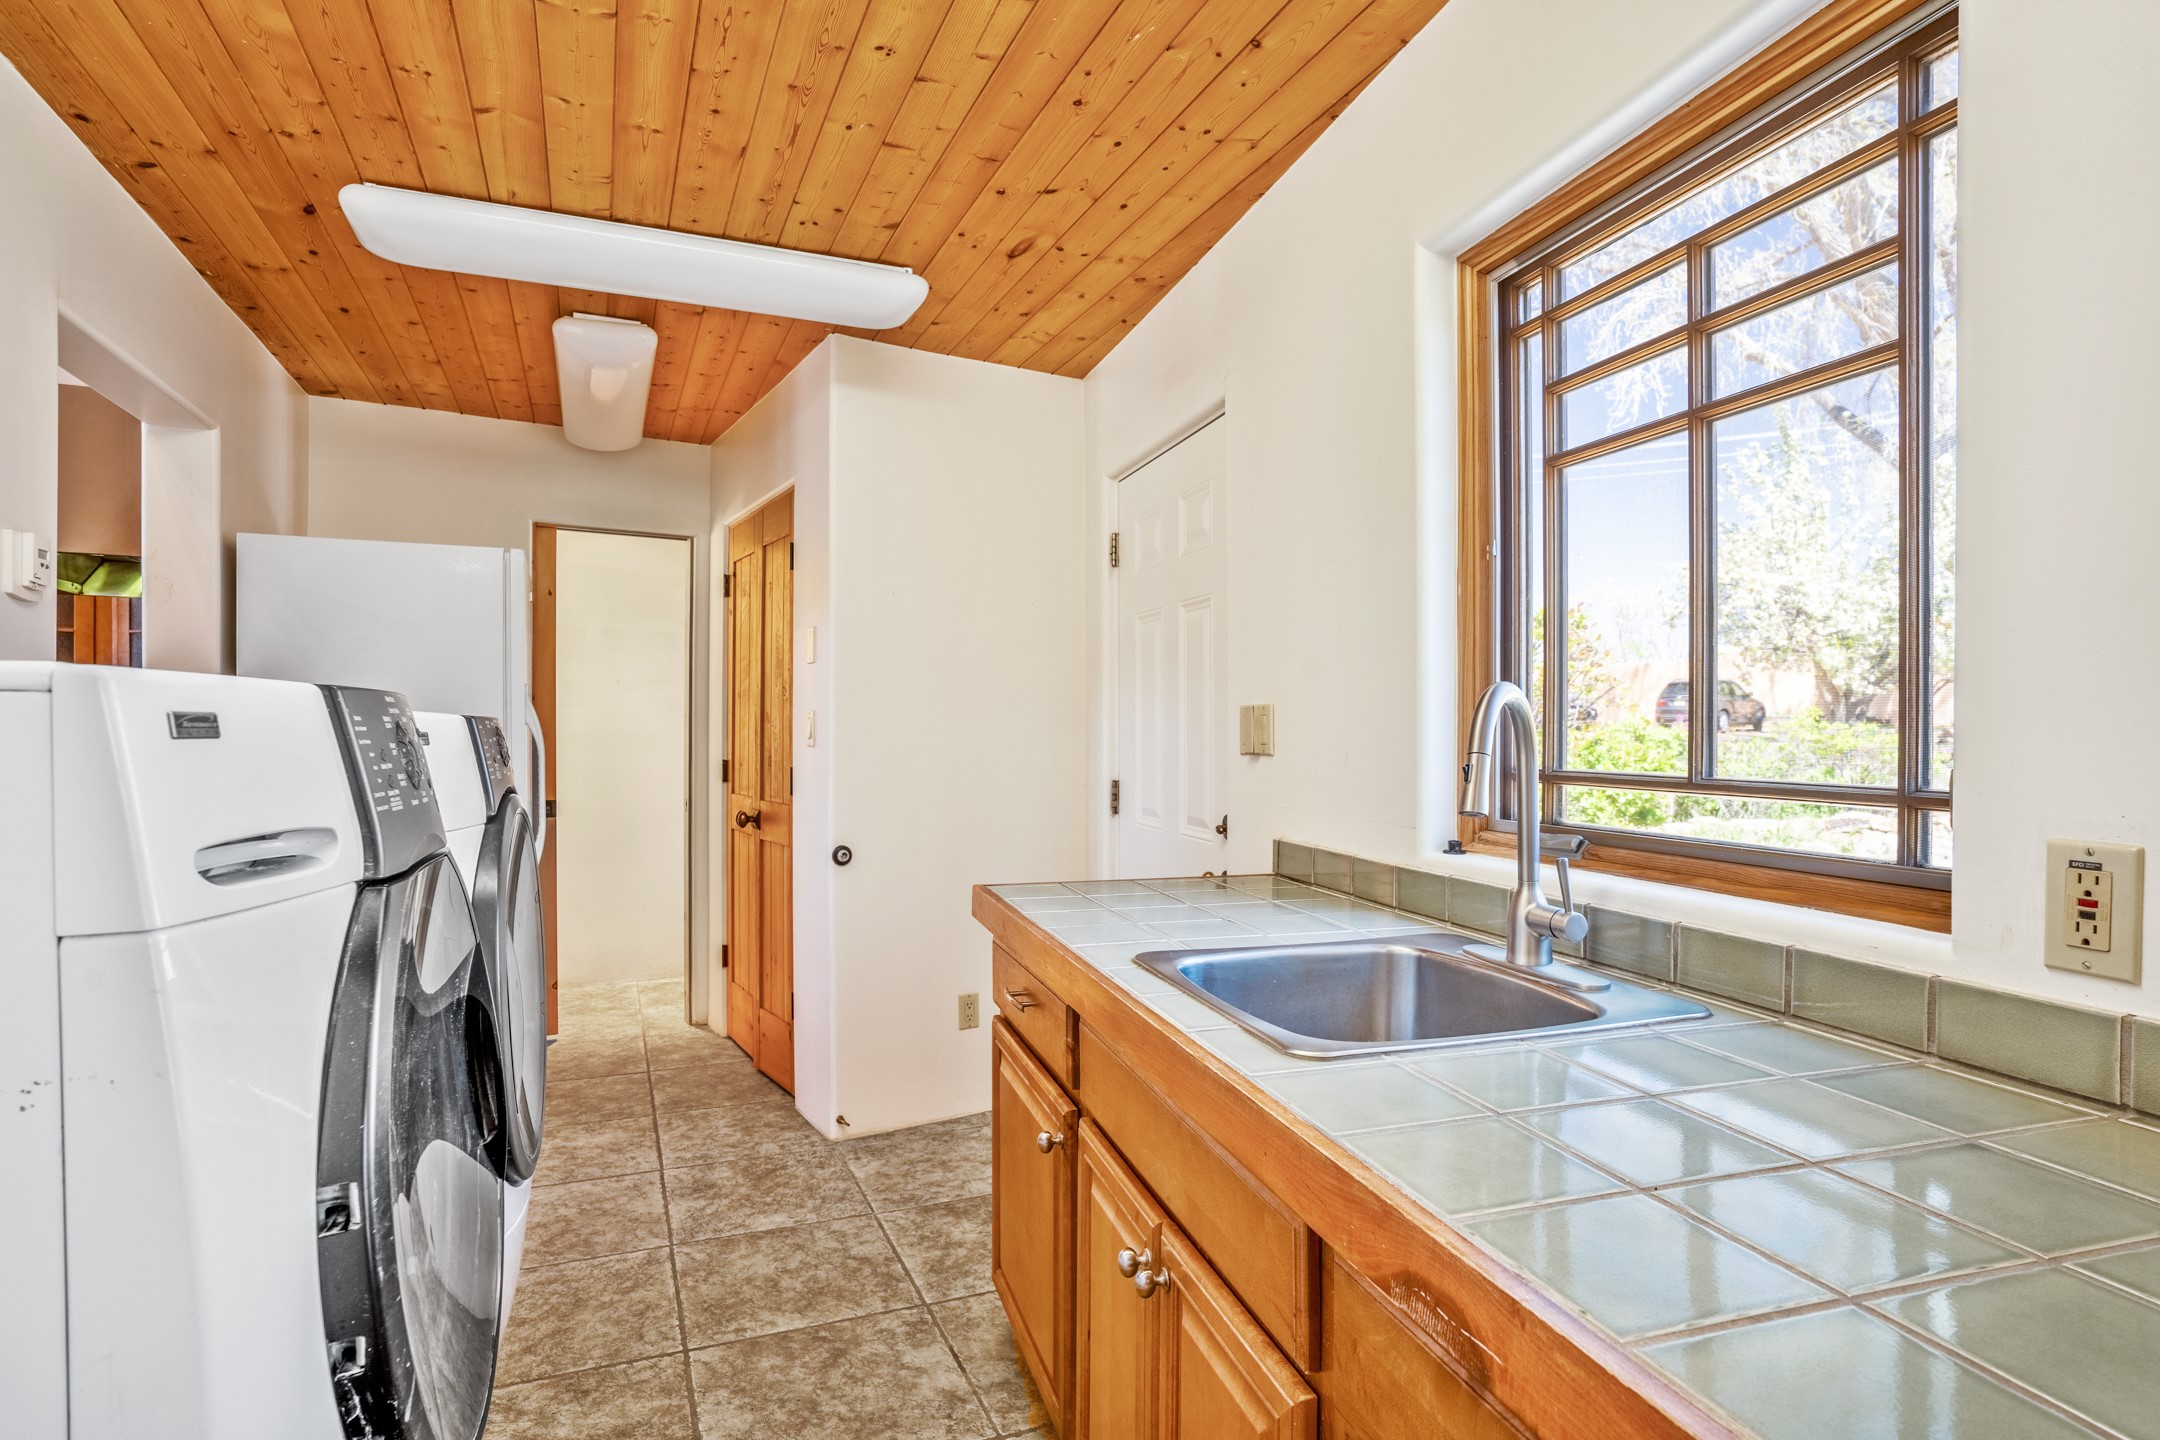 222 Nm 503 Nambe, Santa Fe, New Mexico 87506, 4 Bedrooms Bedrooms, ,5 BathroomsBathrooms,Residential,For Sale,222 Nm 503 Nambe,202401035